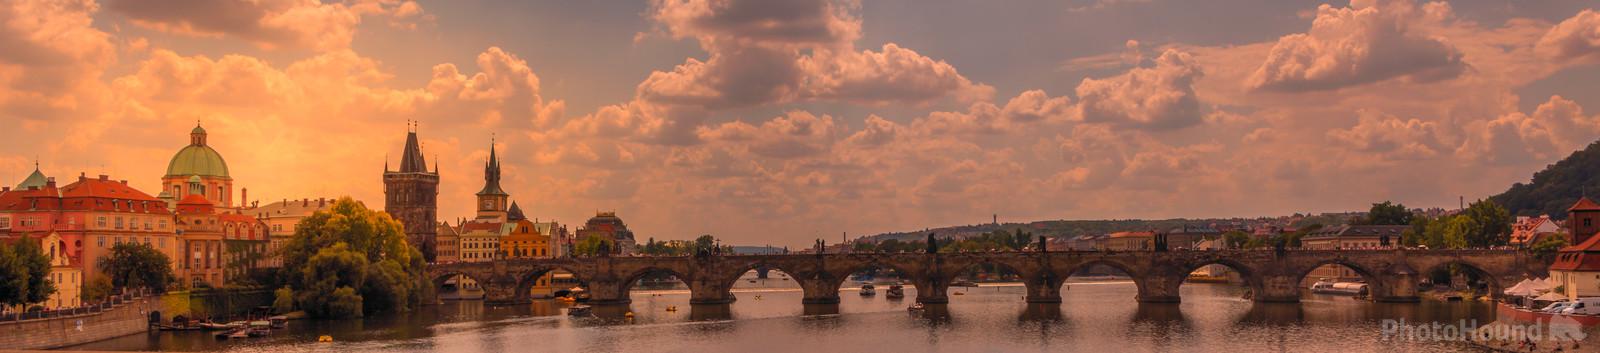 Image of Charles Bridge from Mánes Bridge by Mikki Young